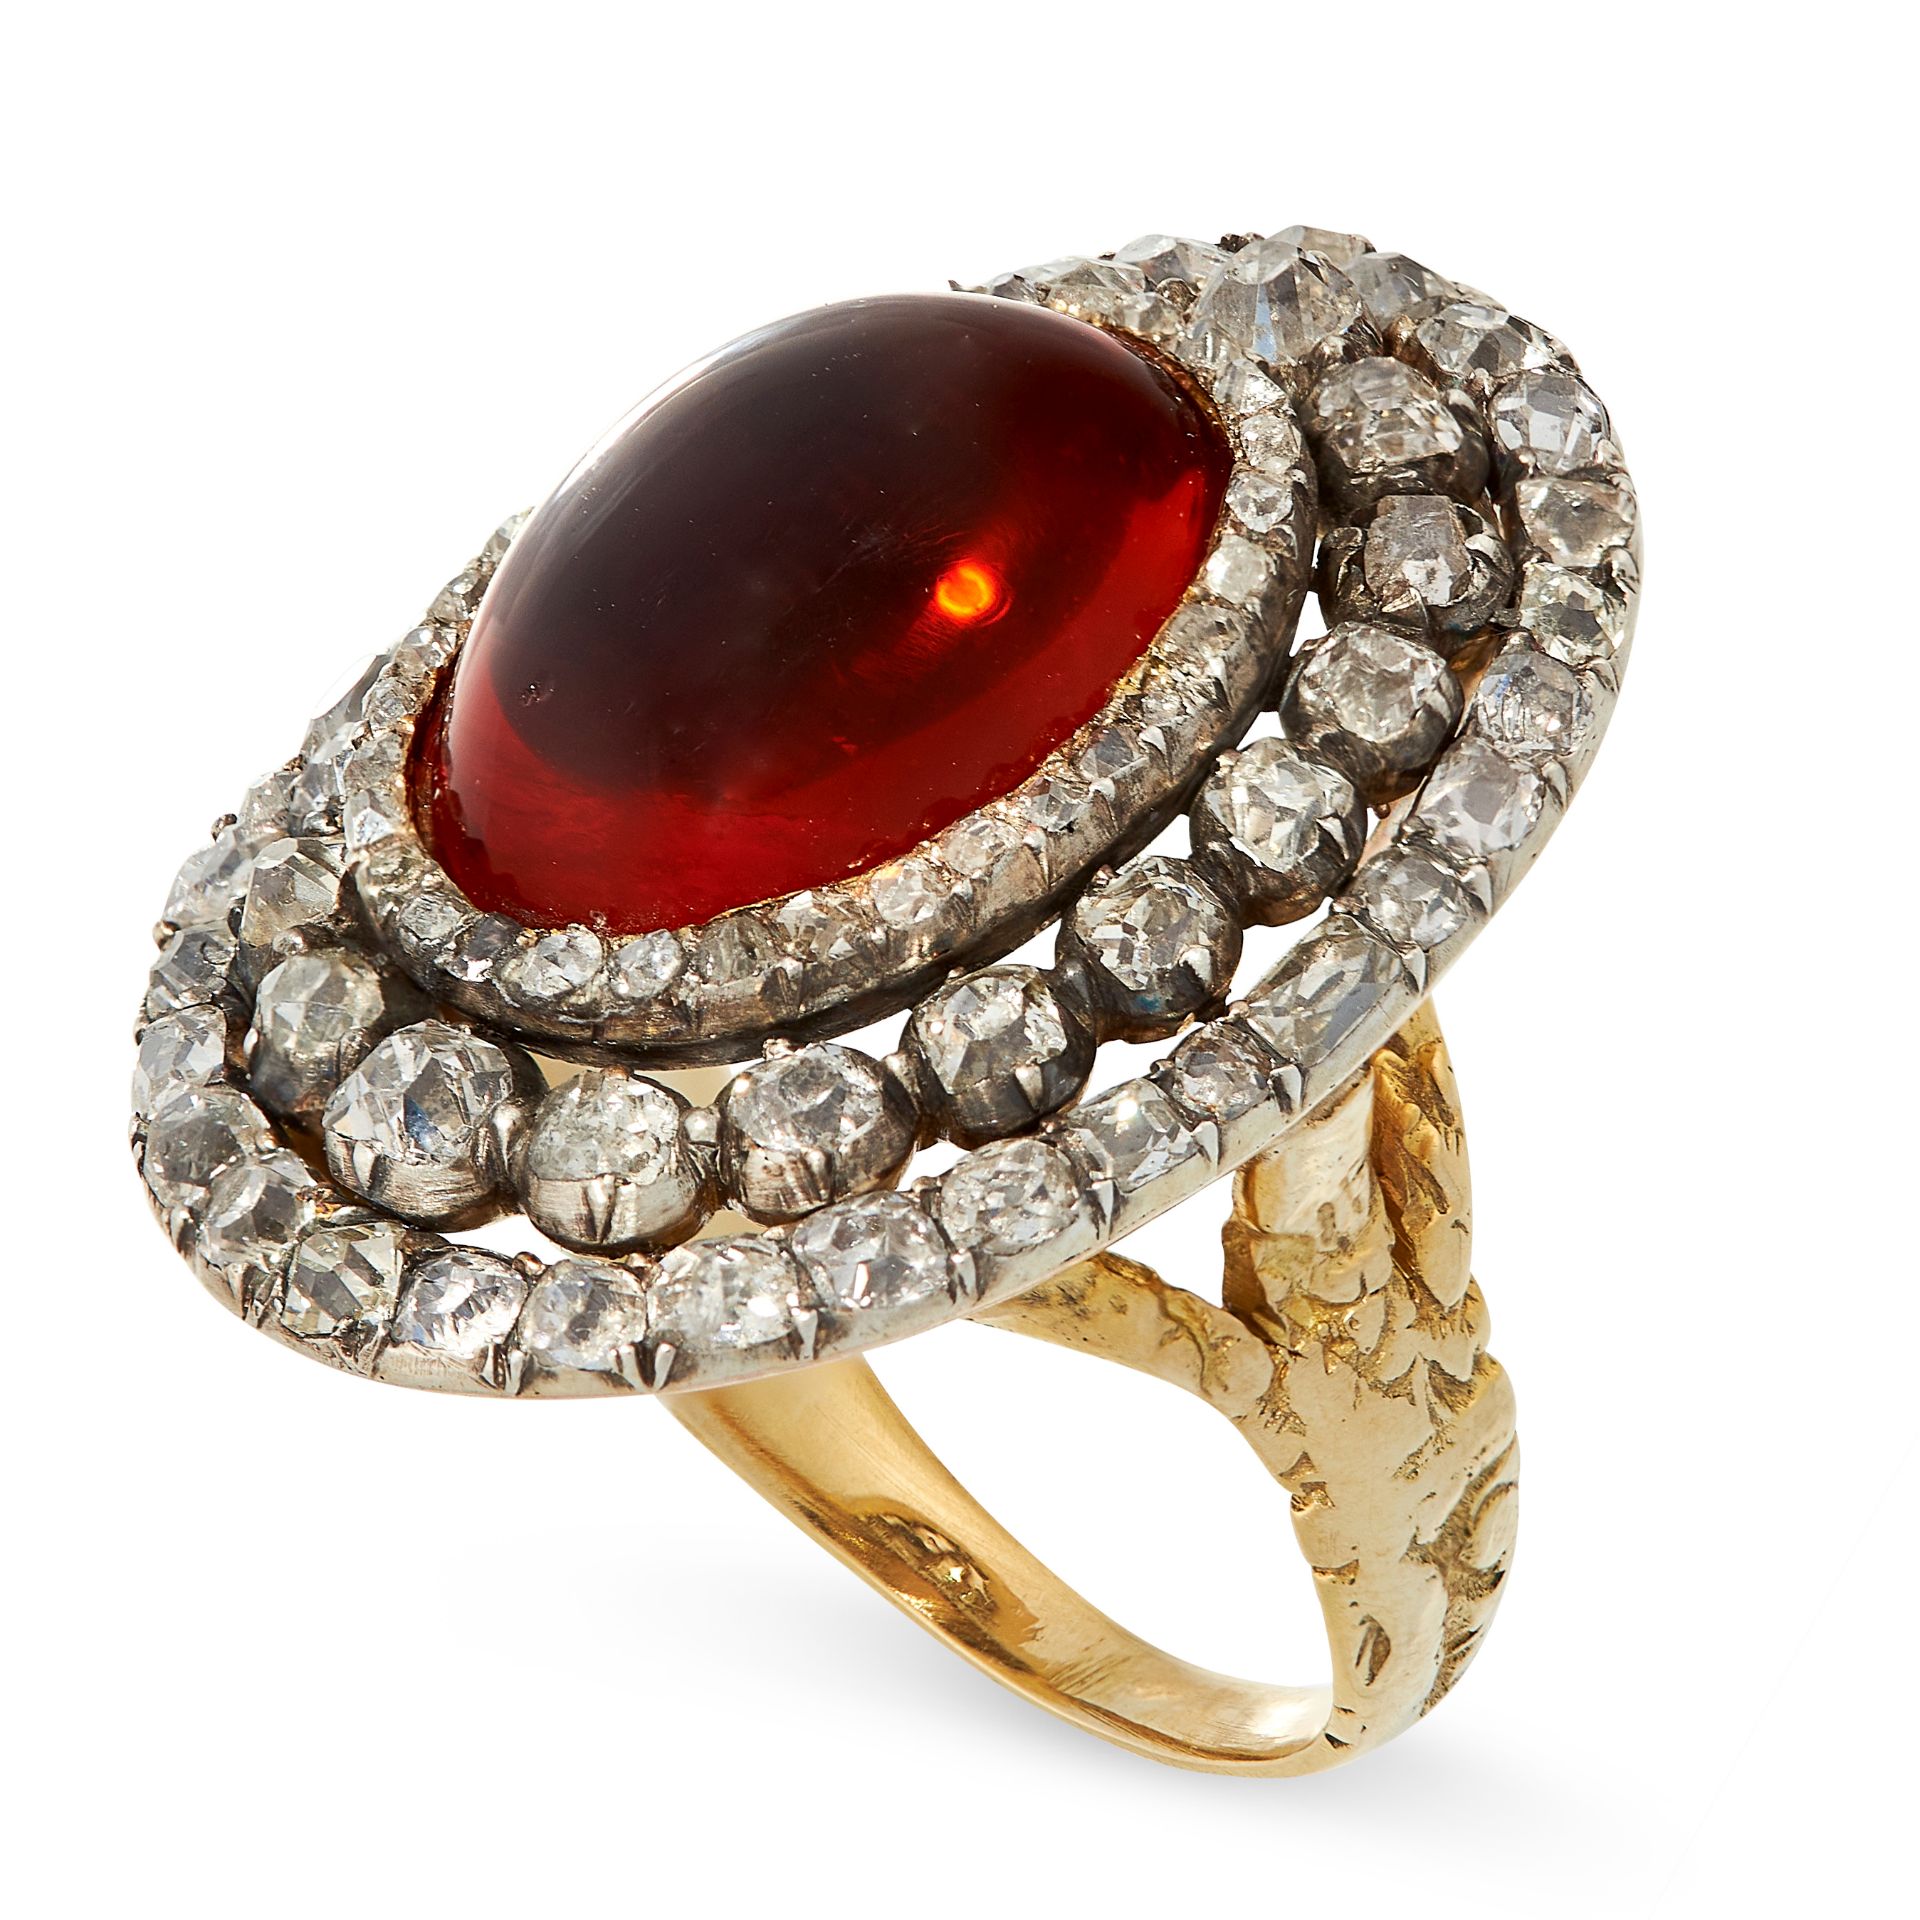 AN ANTIQUE GARNET AND DIAMOND RING in yellow gold and silver, set with an oval cabochon garnet - Image 2 of 3